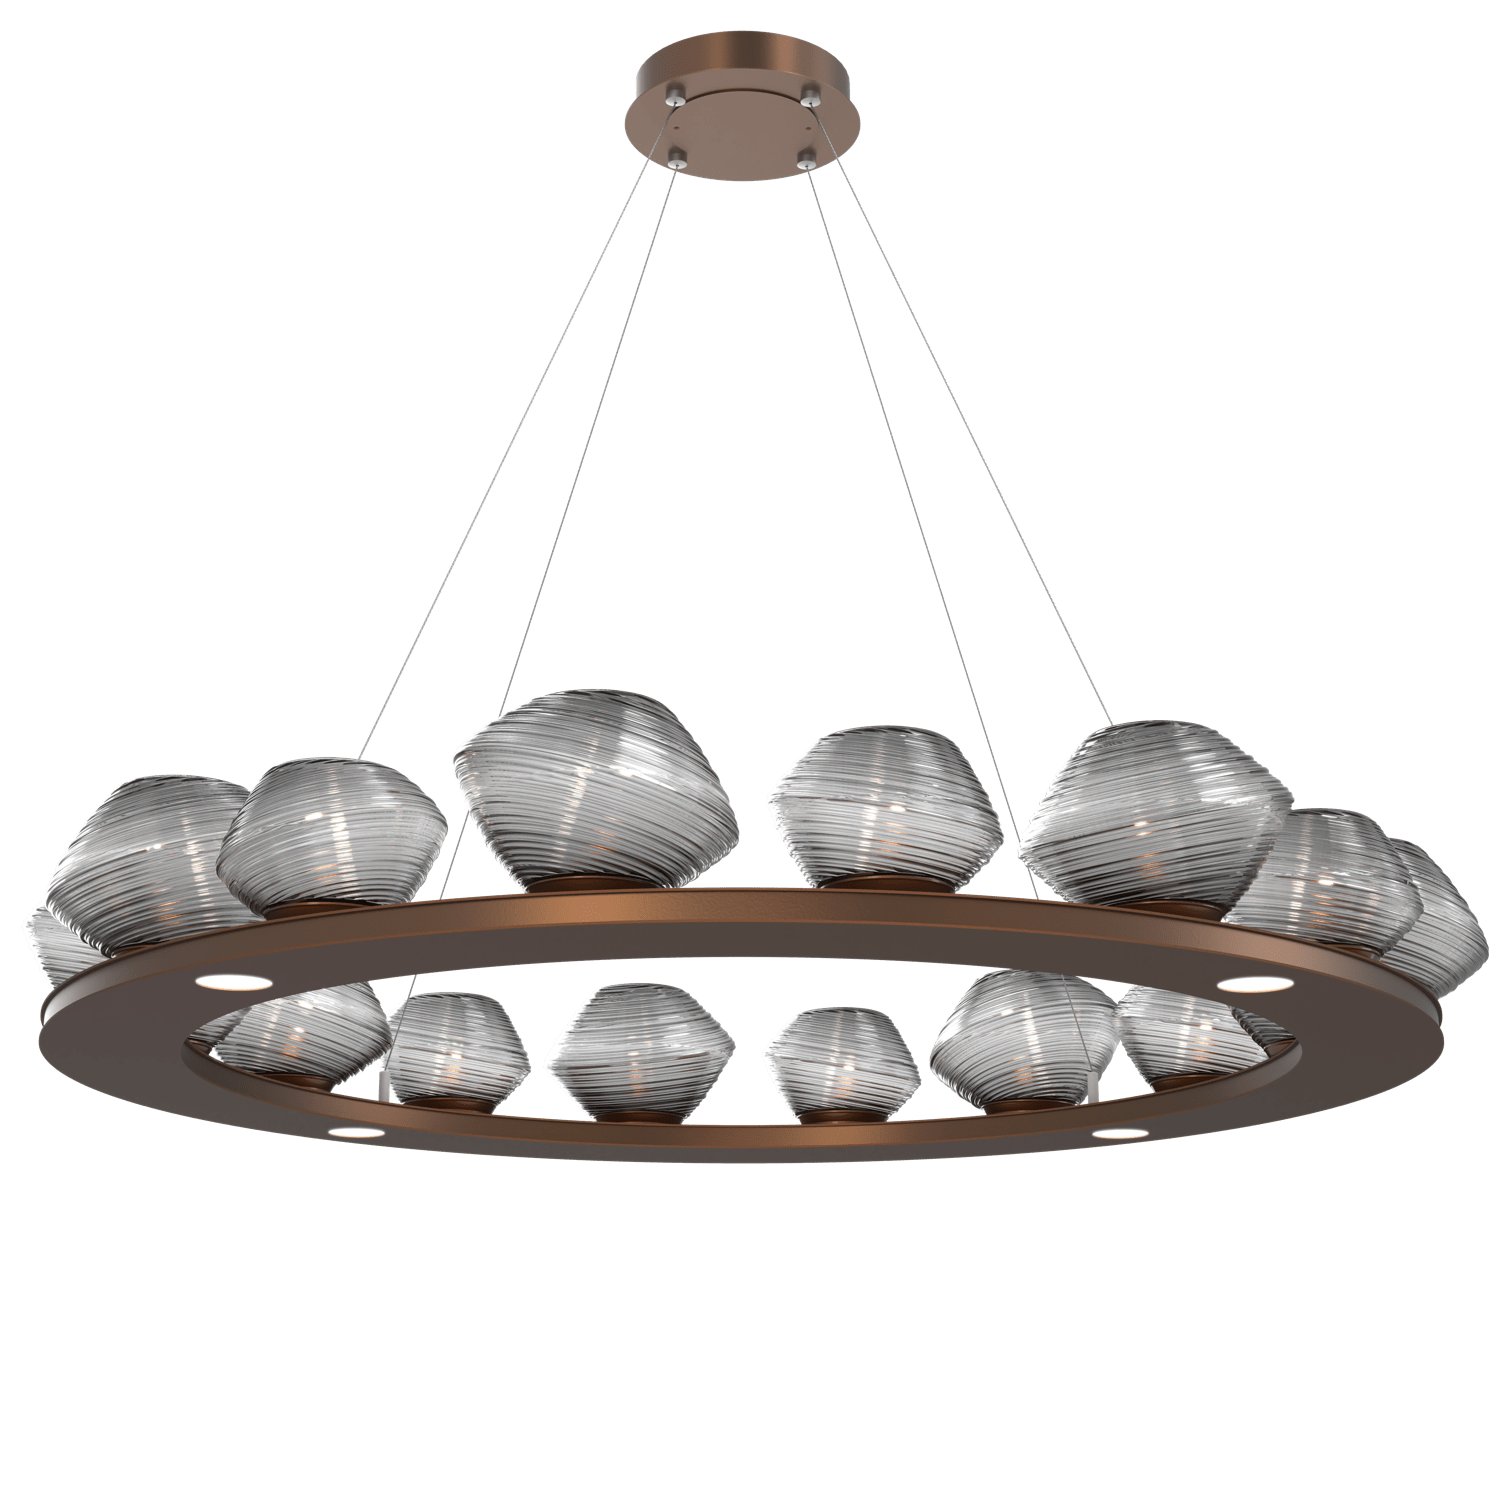 CHB0089-0D-BB-S-Hammerton-Studio-Mesa-48-inch-ring-chandelier-with-burnished-bronze-finish-and-smoke-blown-glass-shades-and-LED-lamping